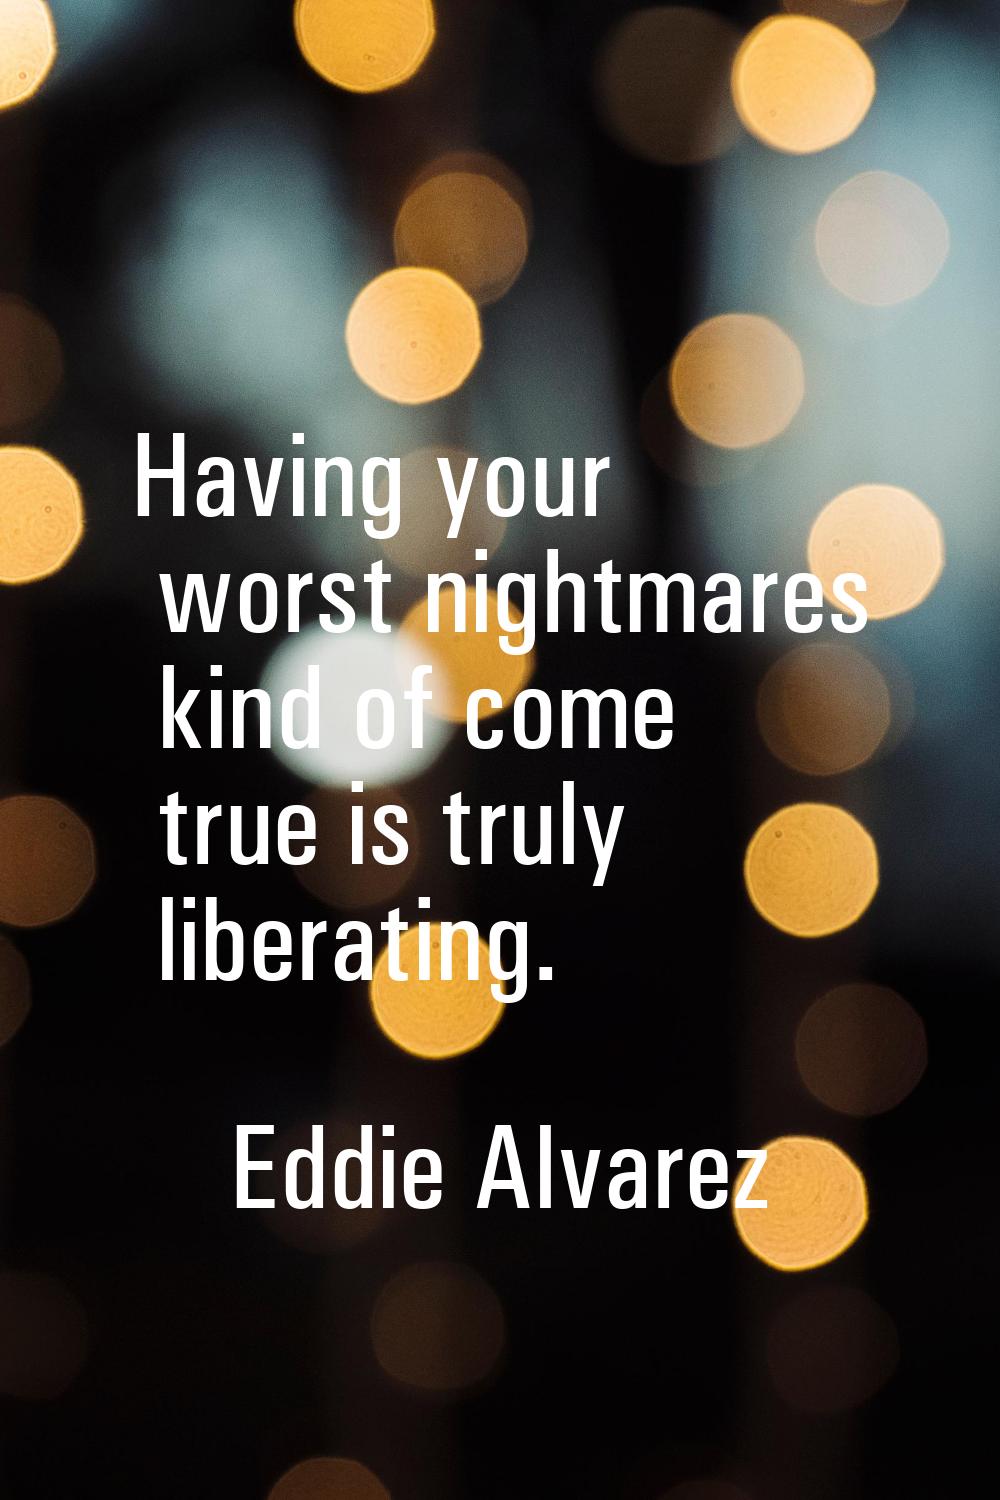 Having your worst nightmares kind of come true is truly liberating.